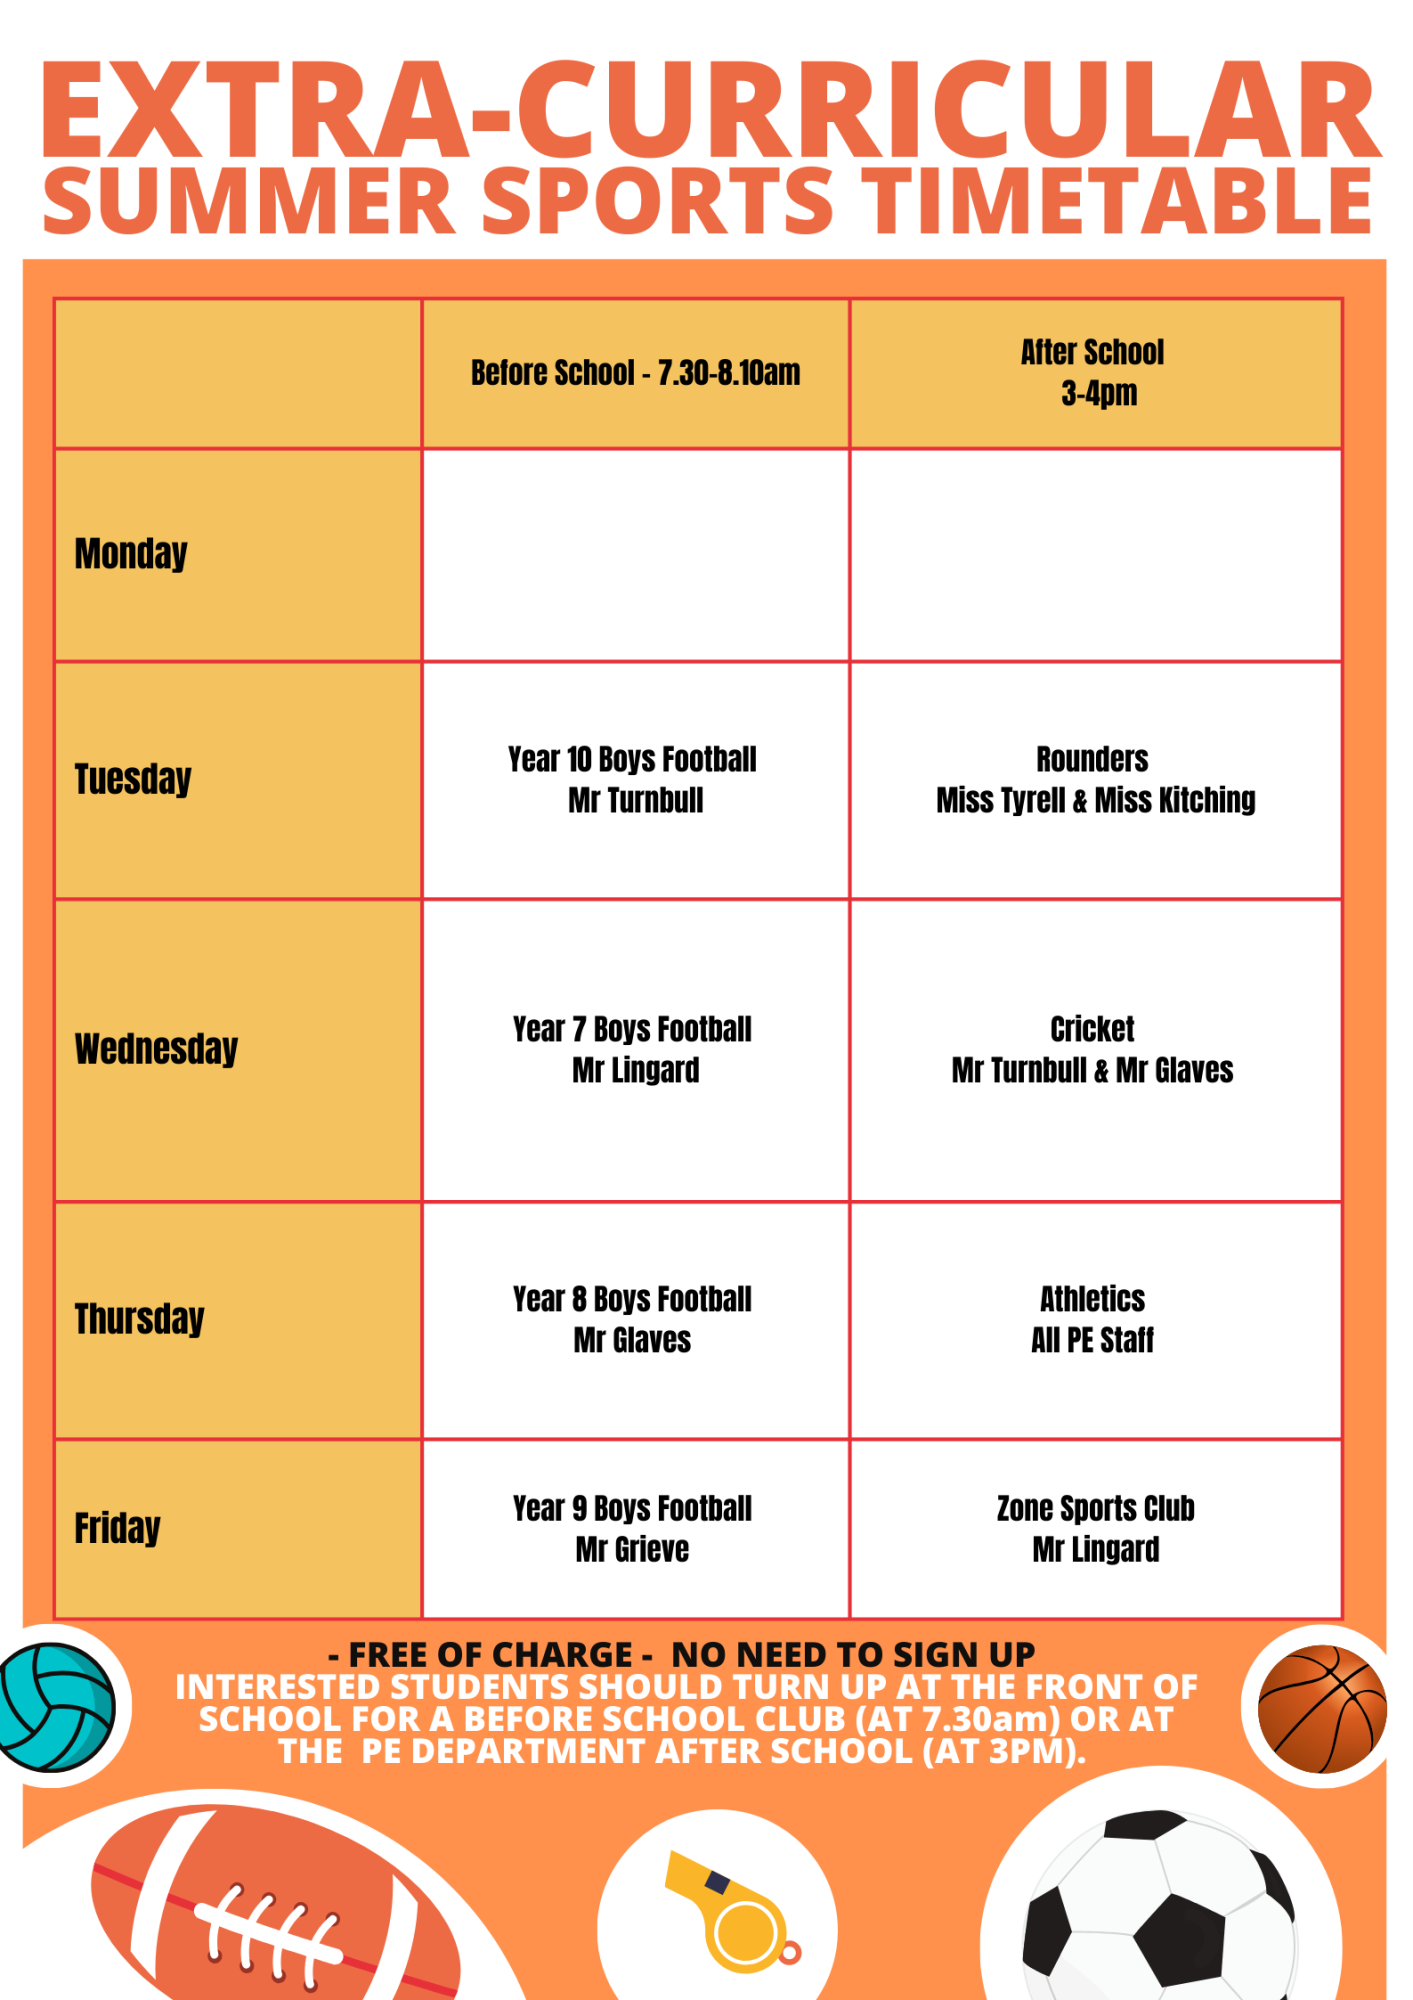 Copy of Extra Curricular Sports Timetable (4)